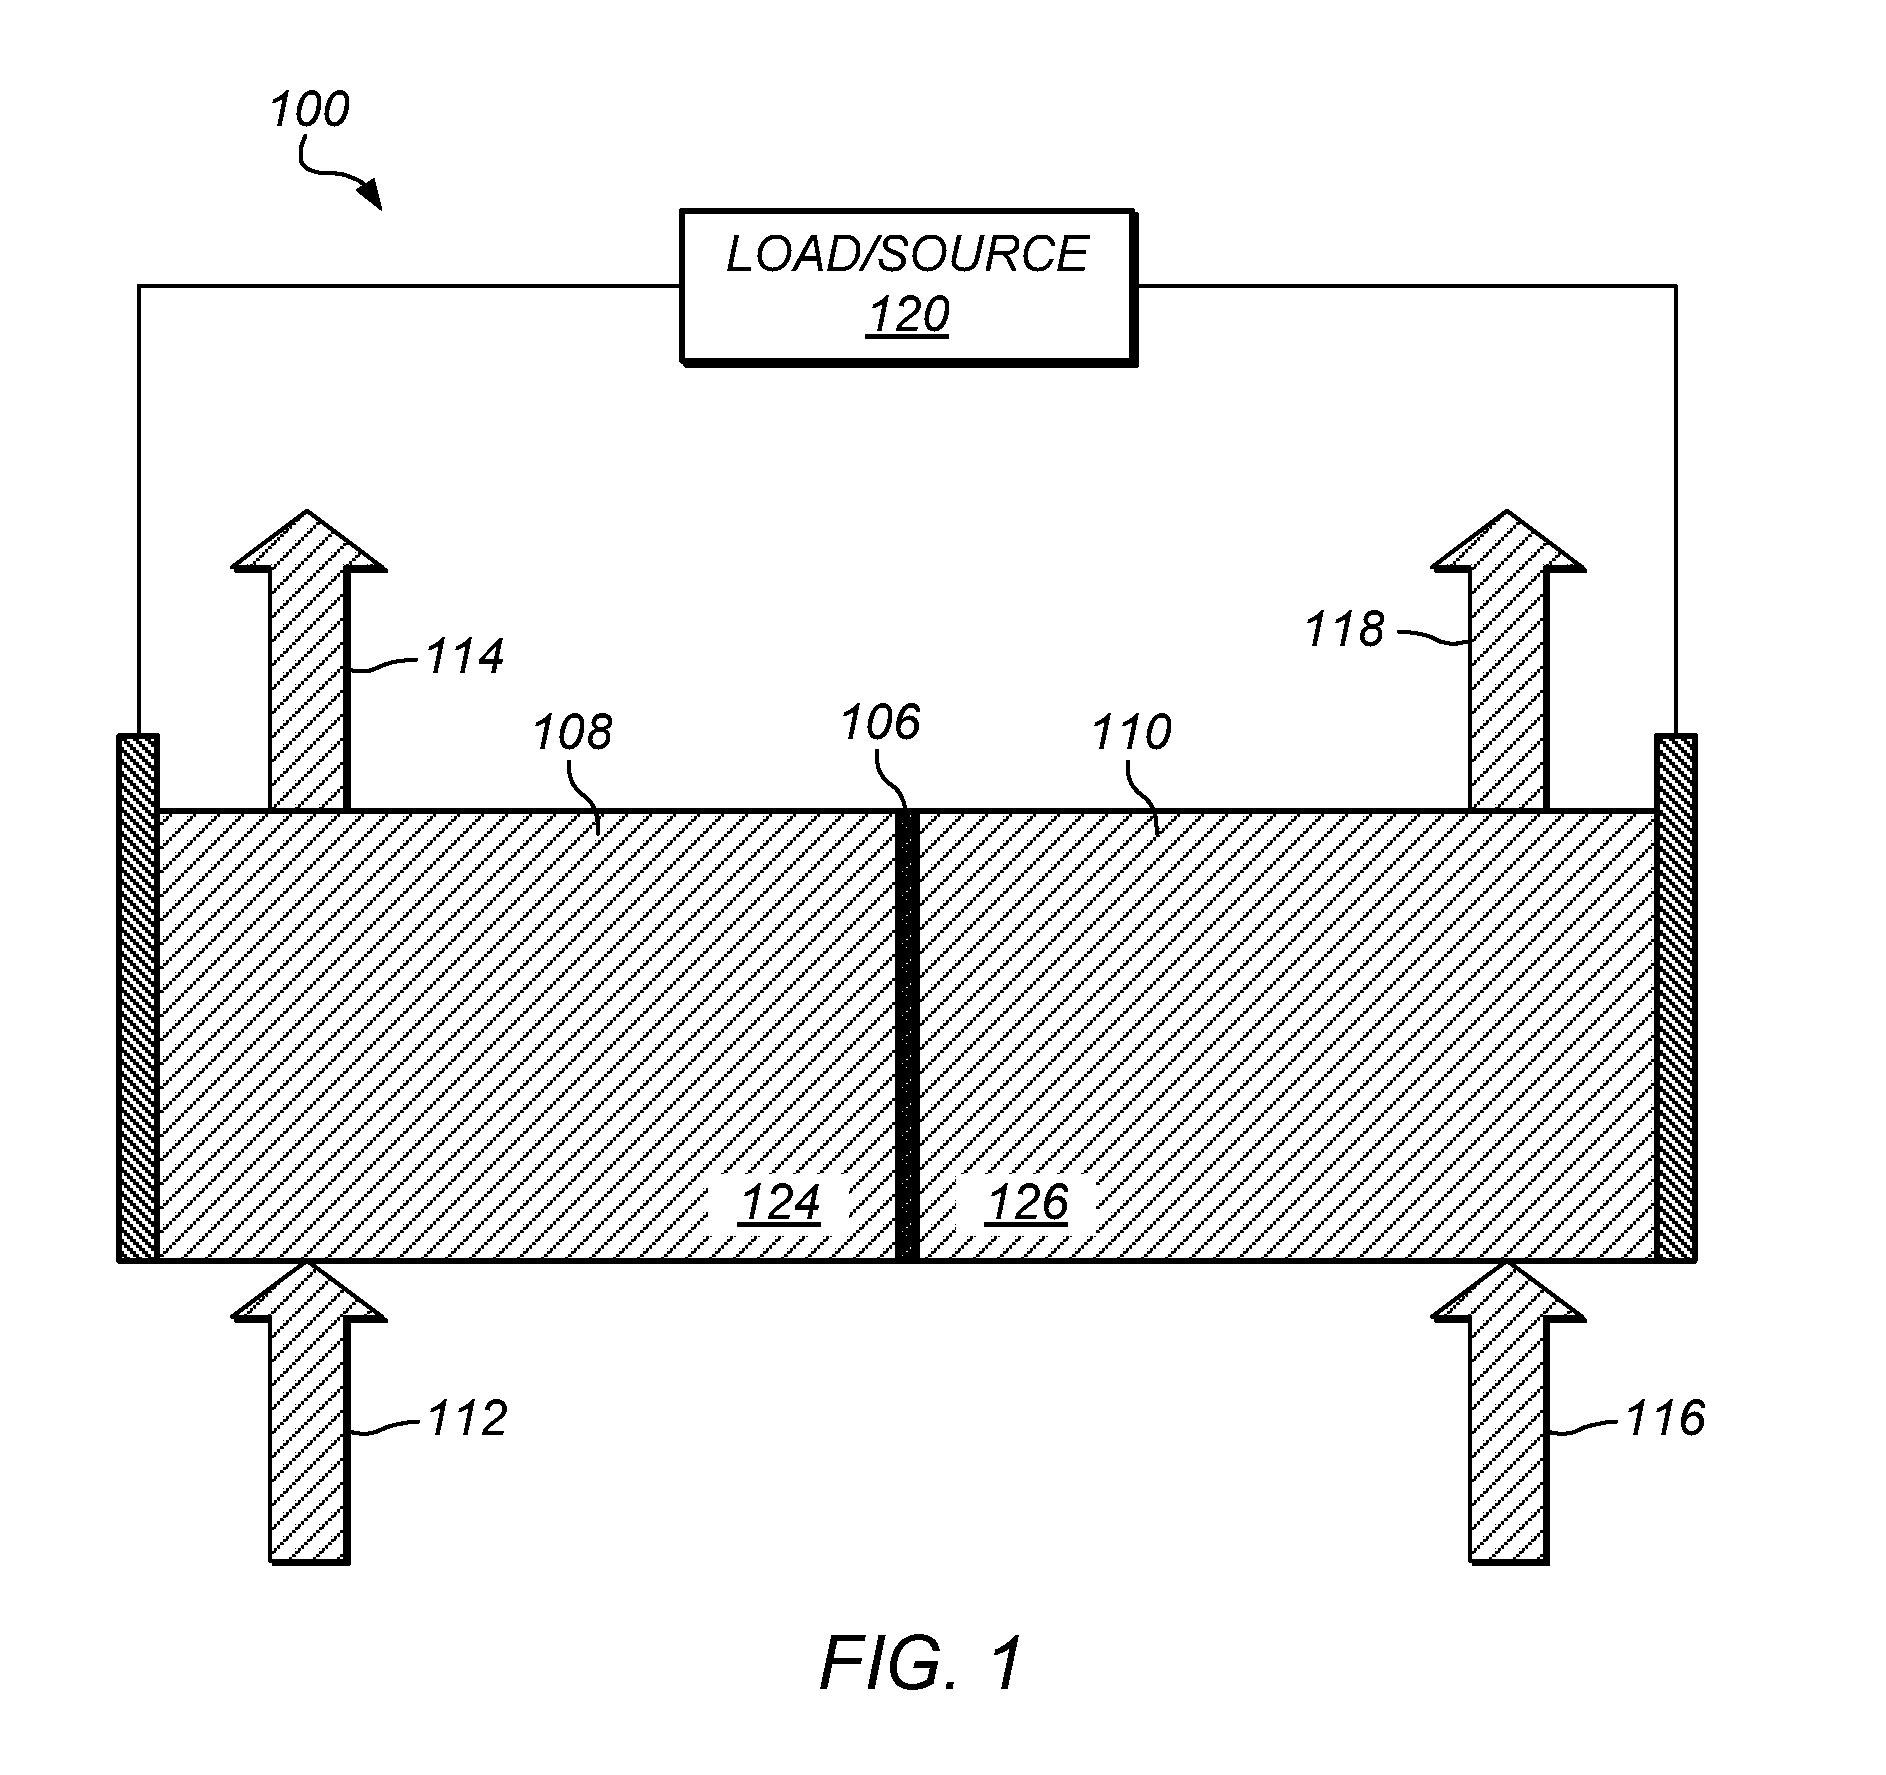 Preparation of flow cell battery electrolytes from raw materials